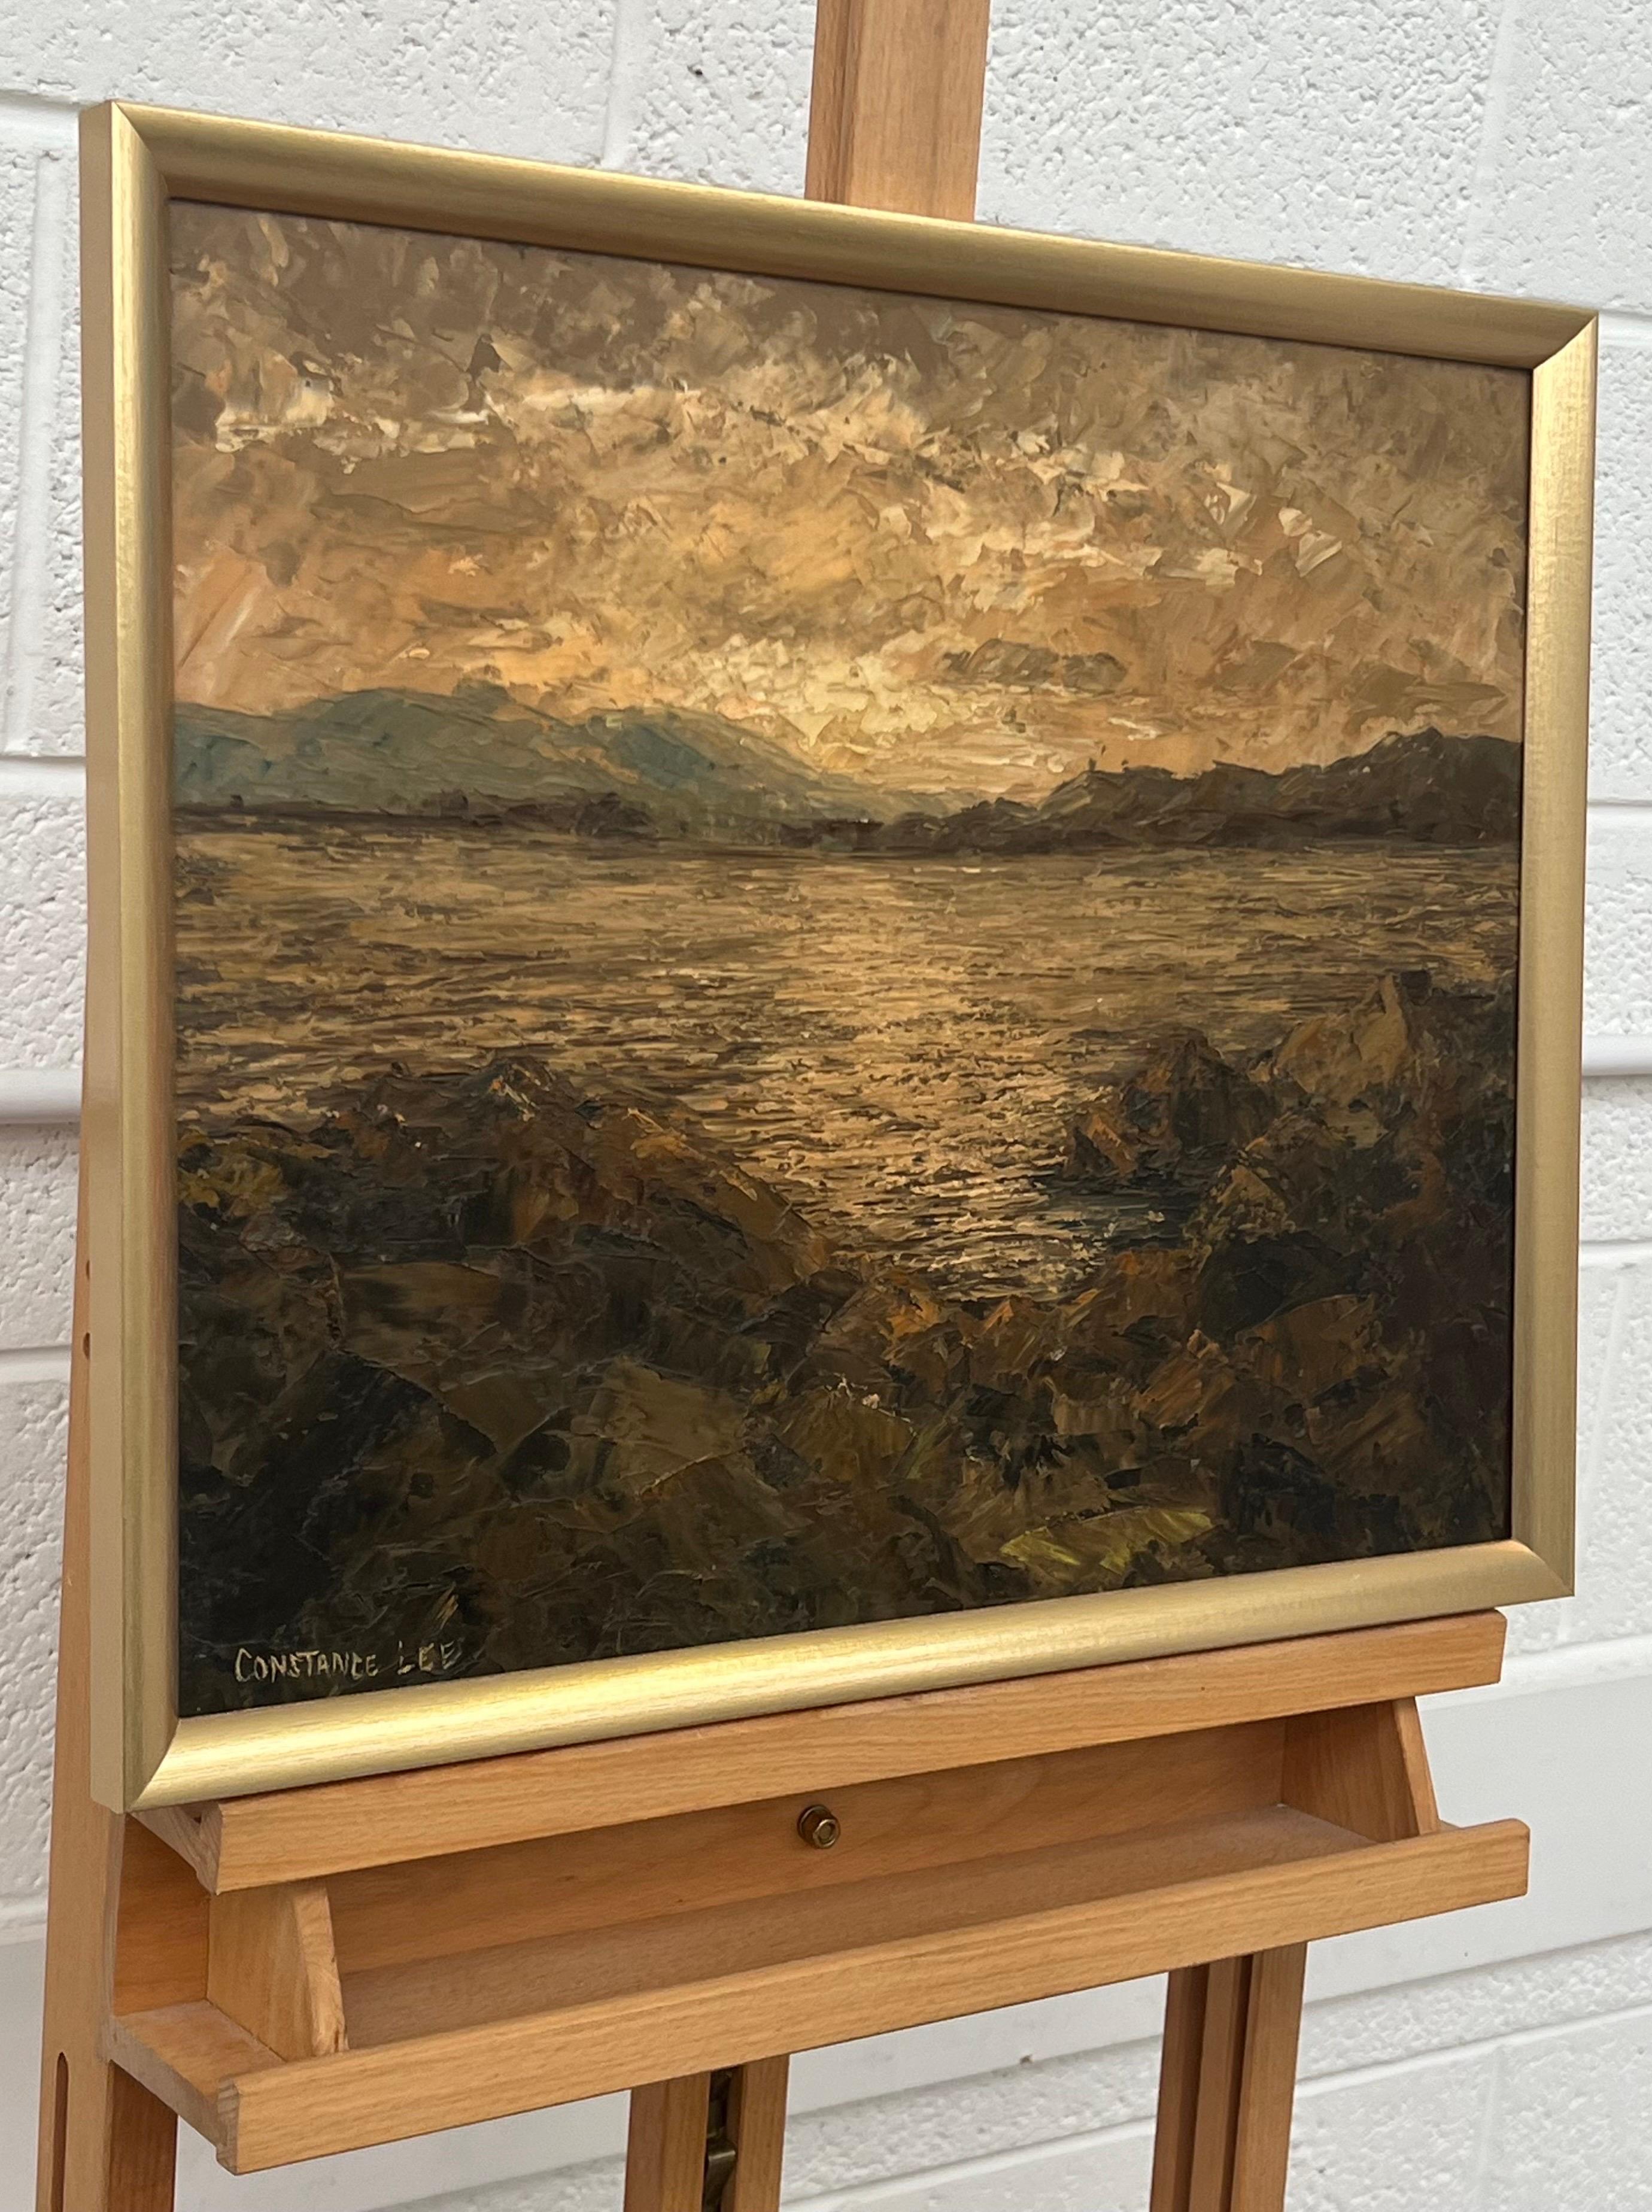 Atmospheric Earthy Sunset Seascape Landscape Impasto Oil Painting by 20th Century Artist, Constance Lee 

Art measures 19 x 15 inches
Frame measures 21 x 17 inches 

This unique original painting captures the shimmering light as it reflects from the